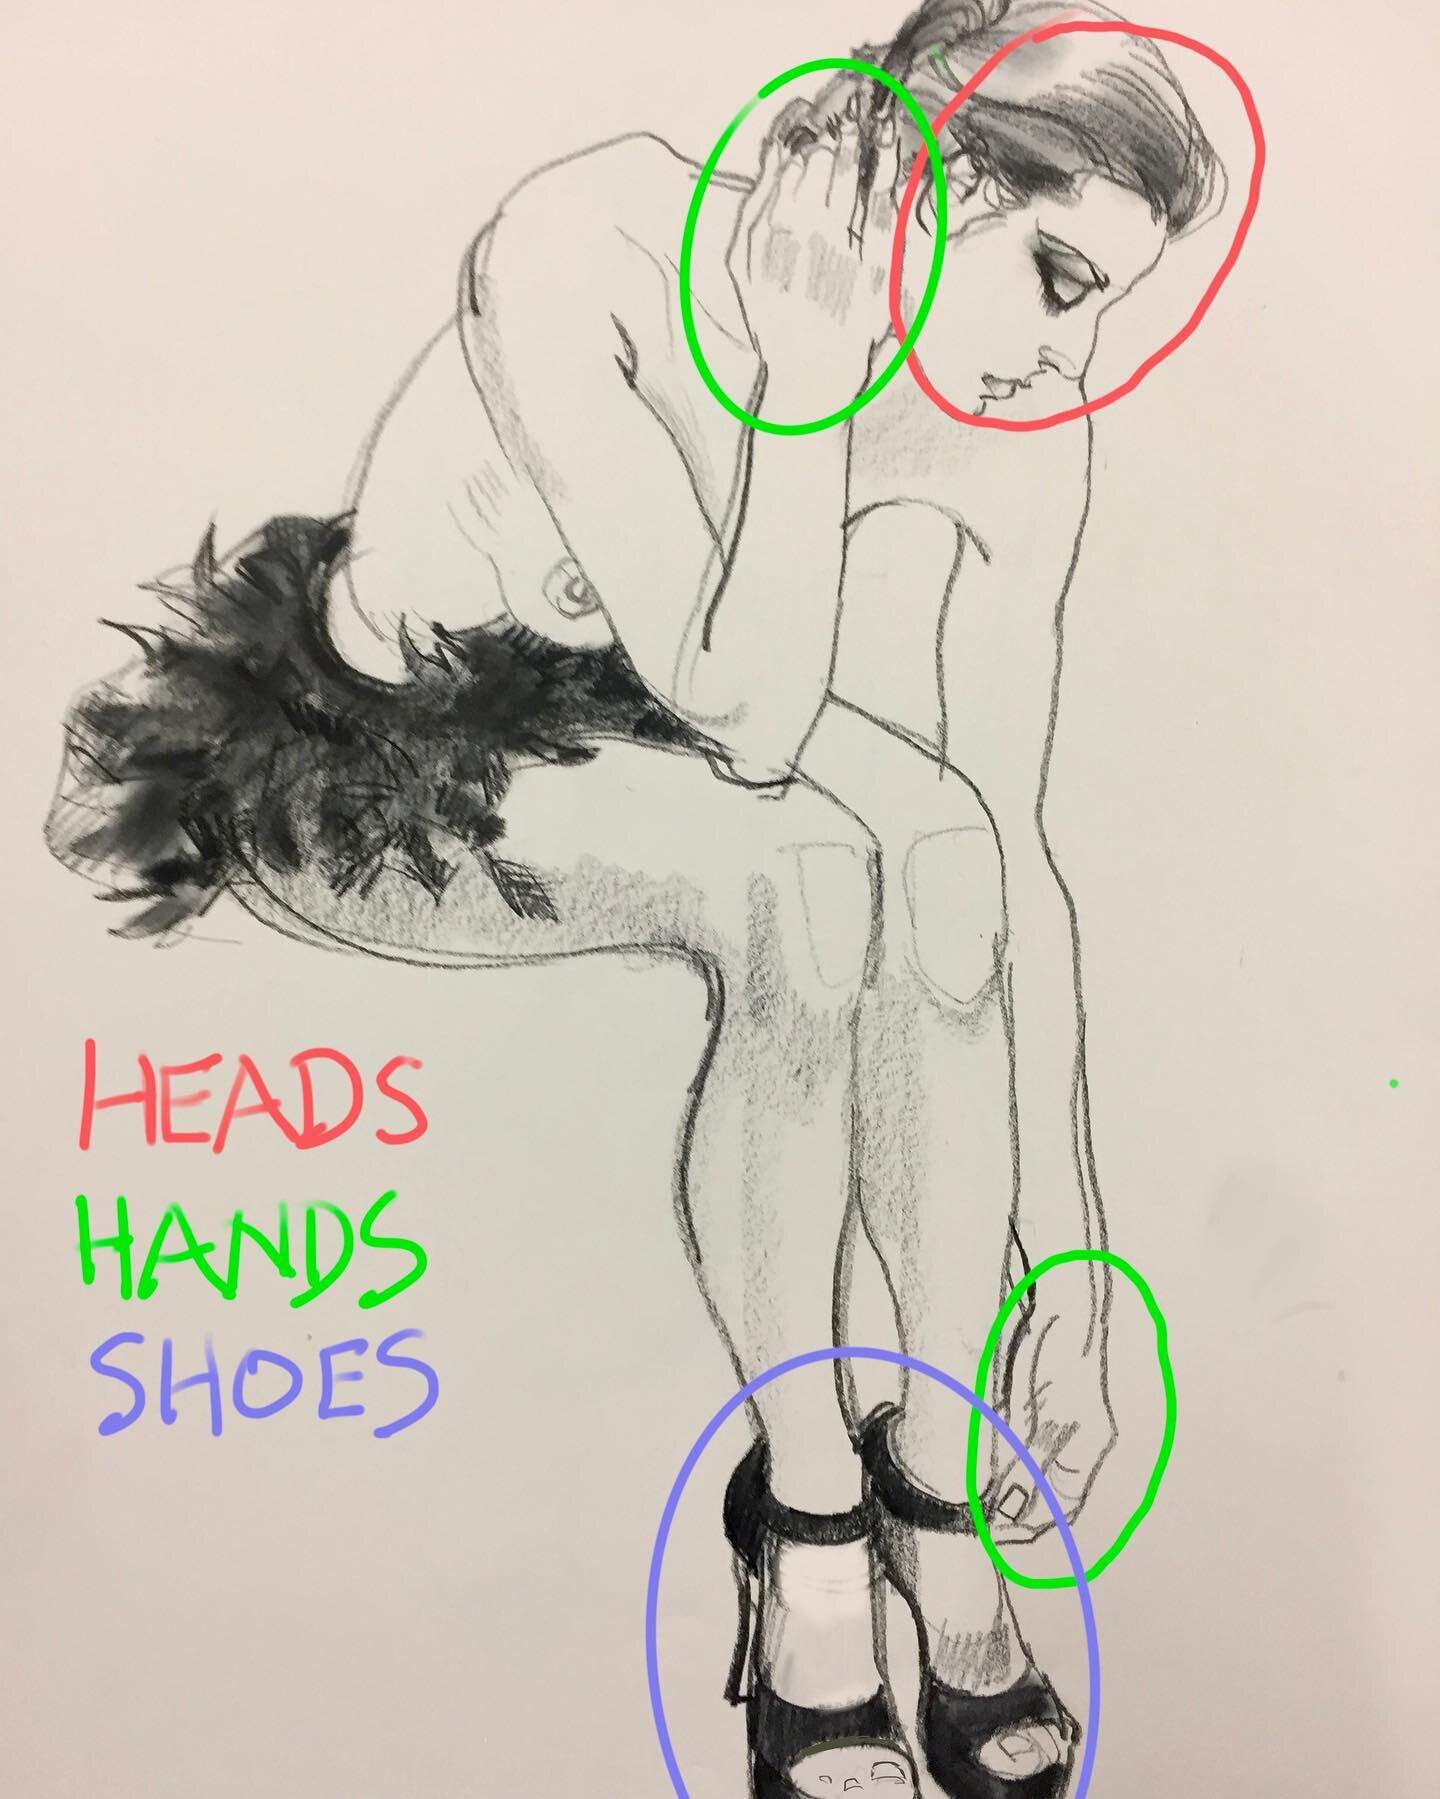 HEADS HANDS SHOES  The first in the next series of three classes on @artifelle is on Heads. Go to link in bio to enroll on Artifelle.com  #fashion #drawing coach #GWQ #fashionillustration #fashionart  #  #